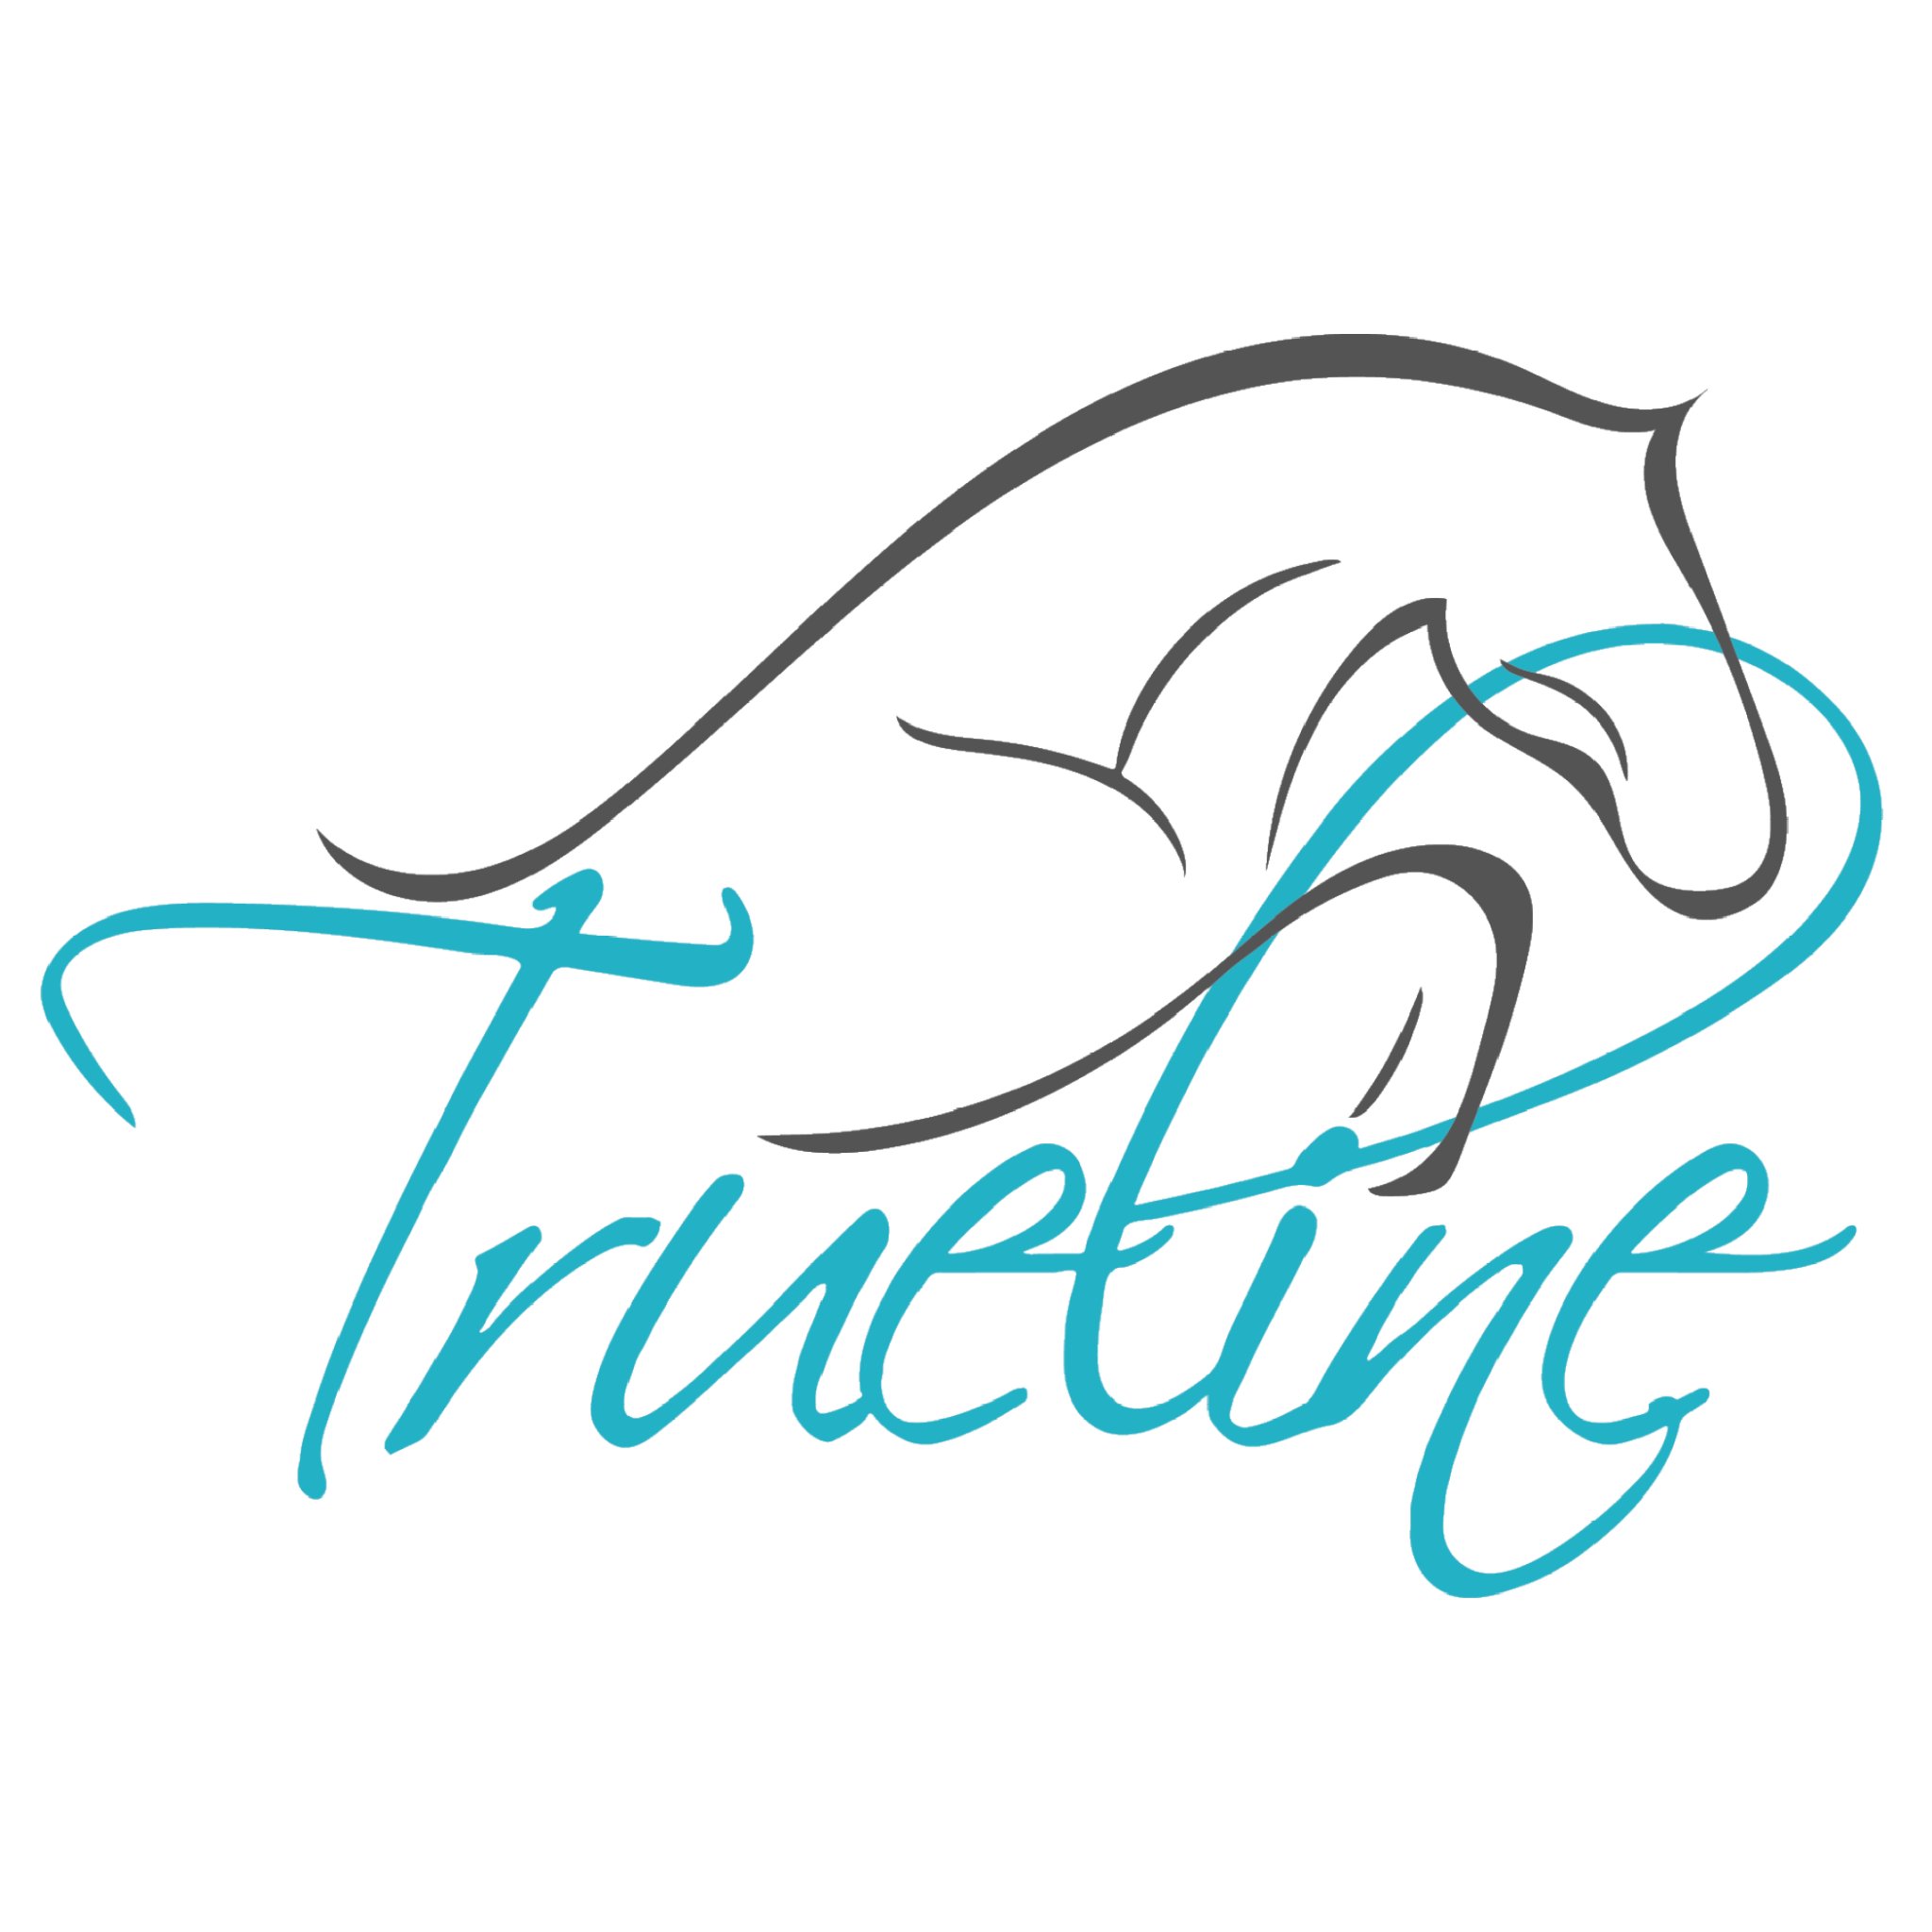 Custom graphics for new businesses at affordable pricing. Trueline specializes in making your logo personalized to you.